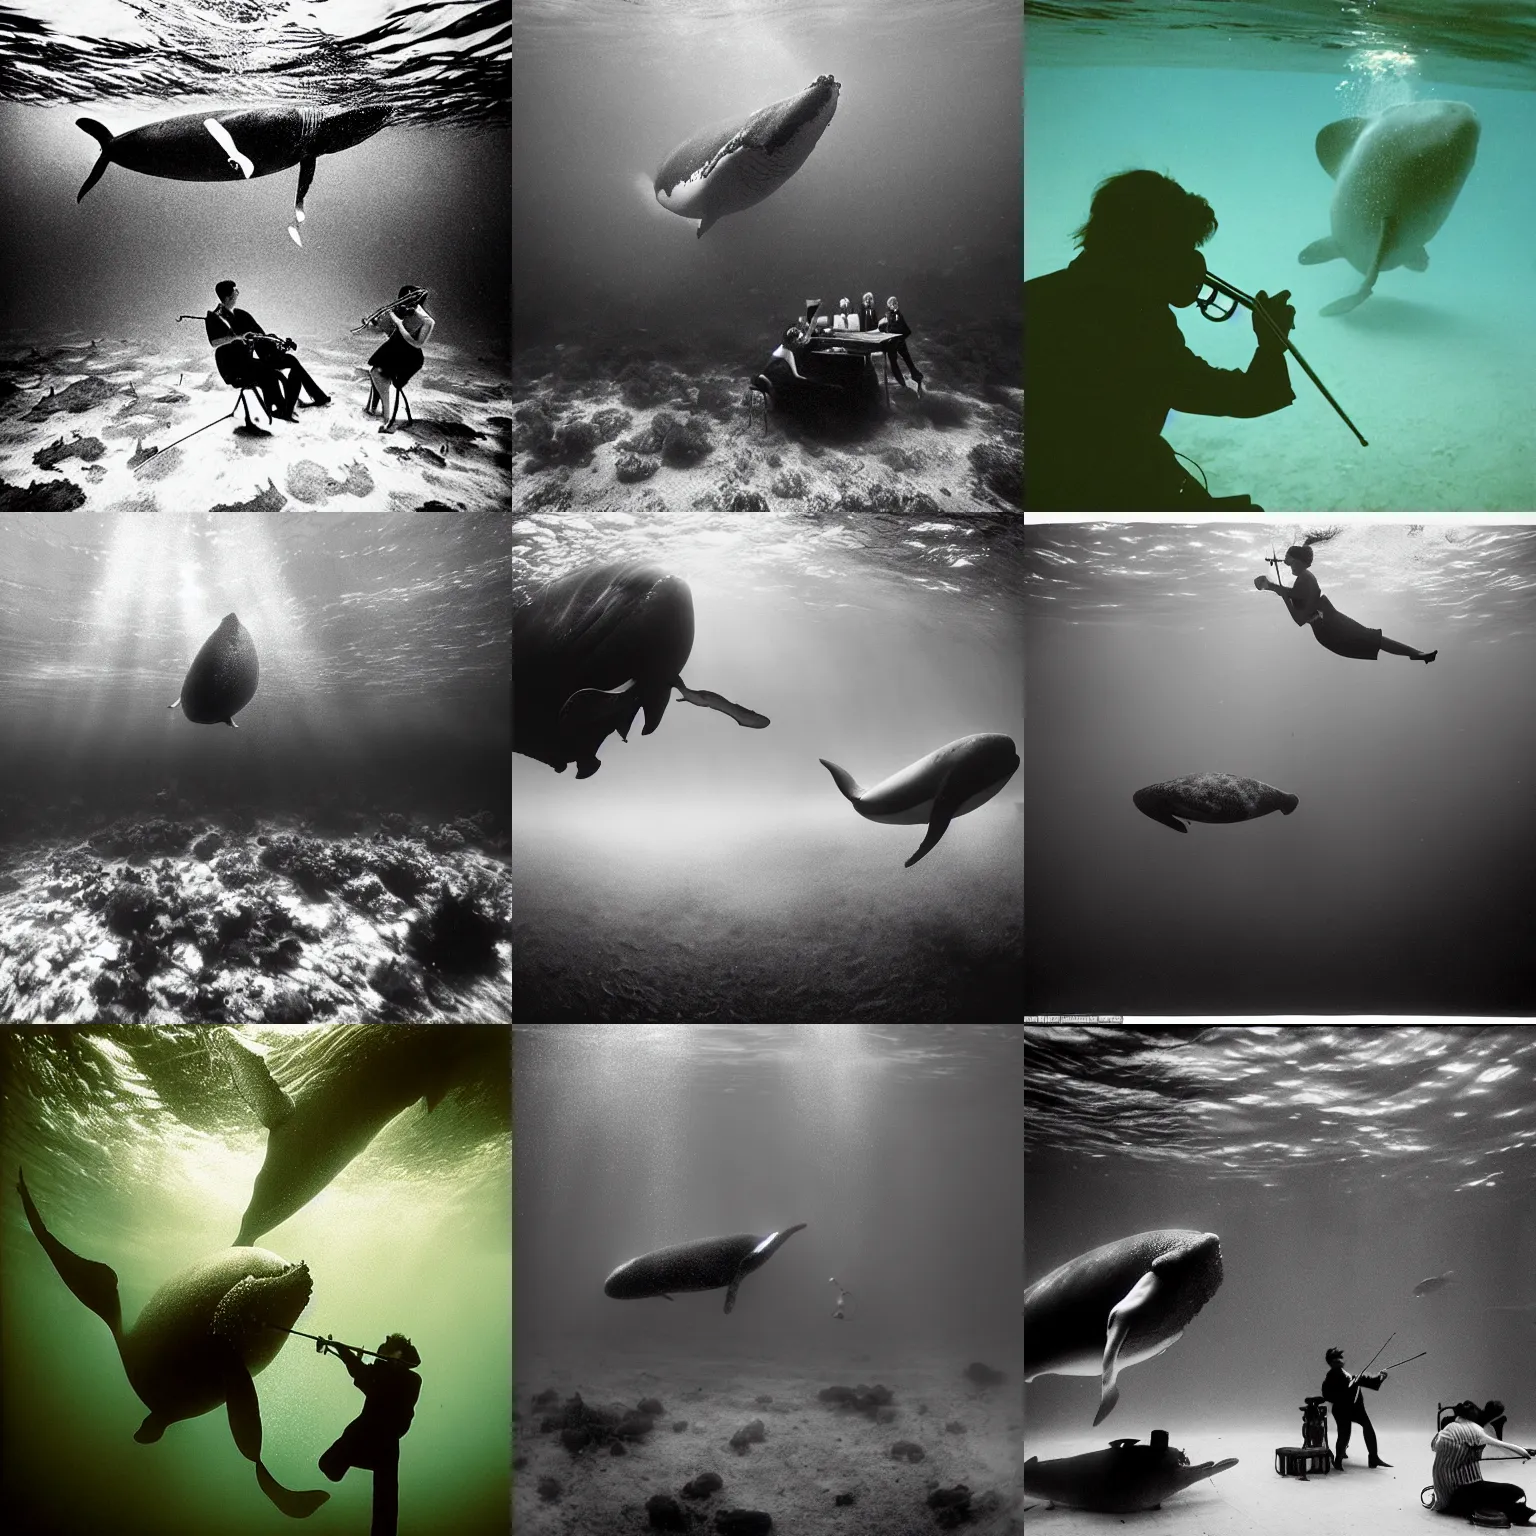 Prompt: Underwater concerto with violinists and whales by Trent Parke, clean, detailed, Magnum photos